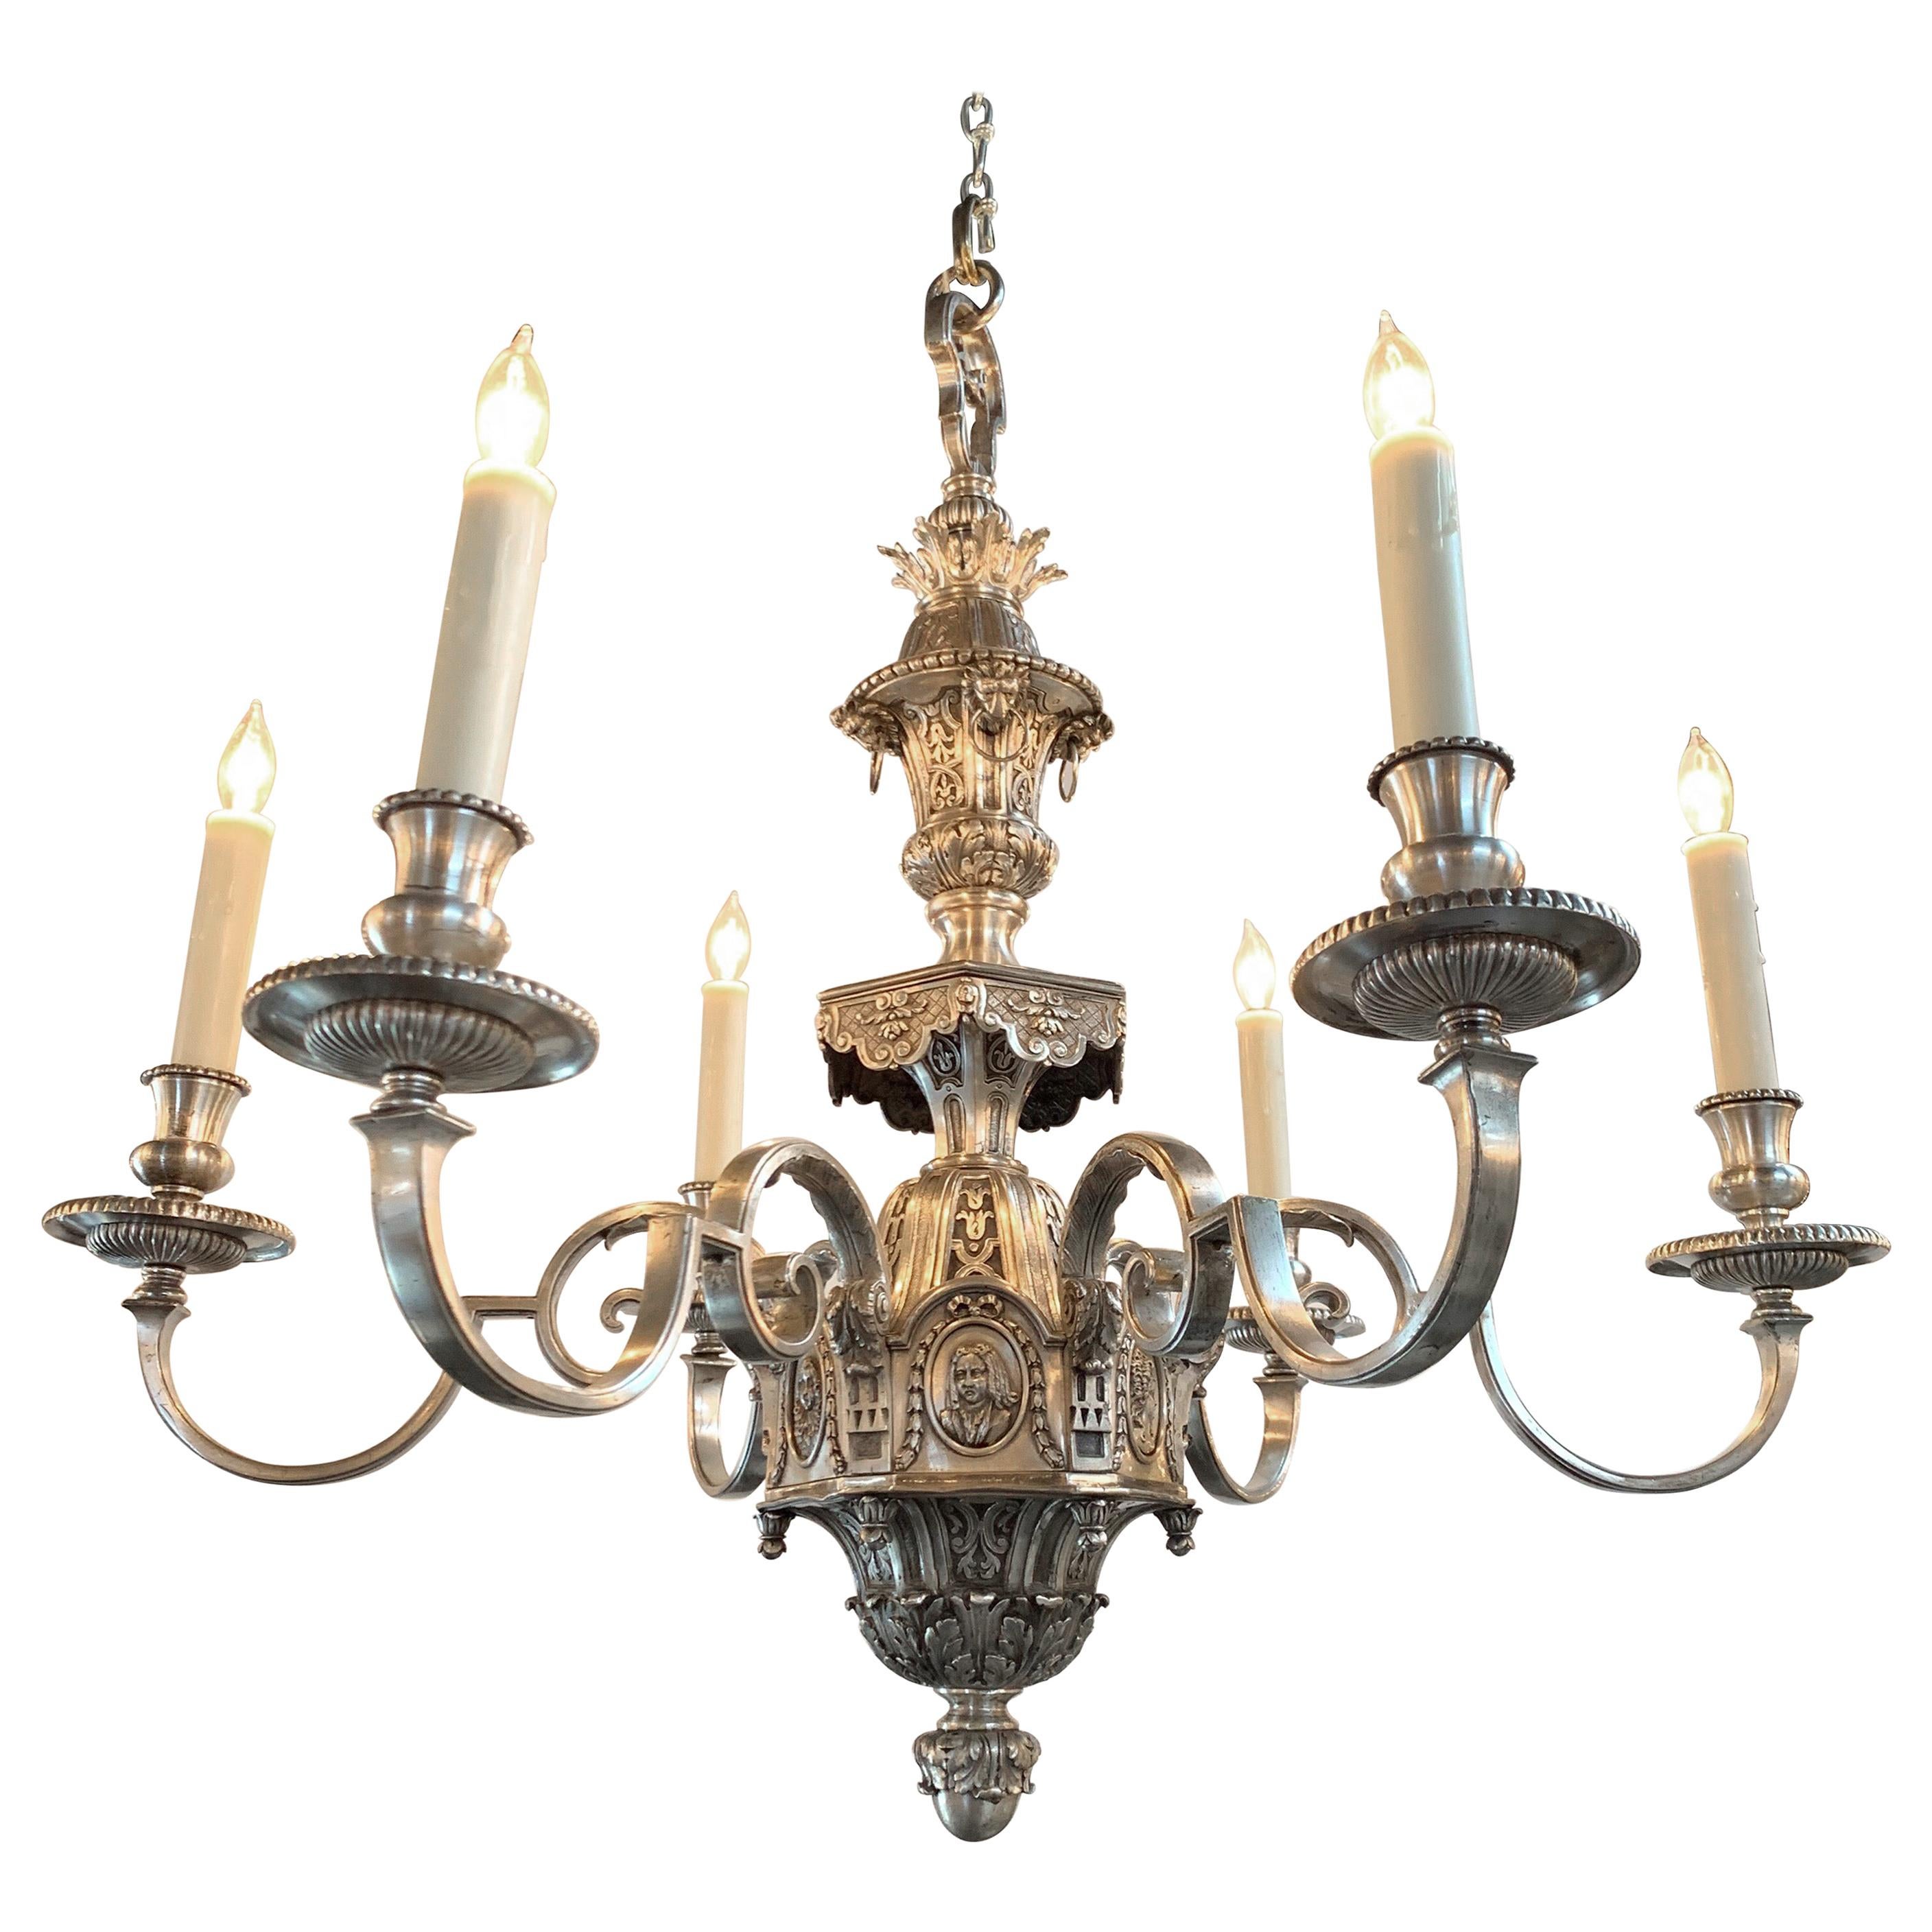 19th Century English Neoclassical Silver over Bronze 6 Light Chandelier For Sale